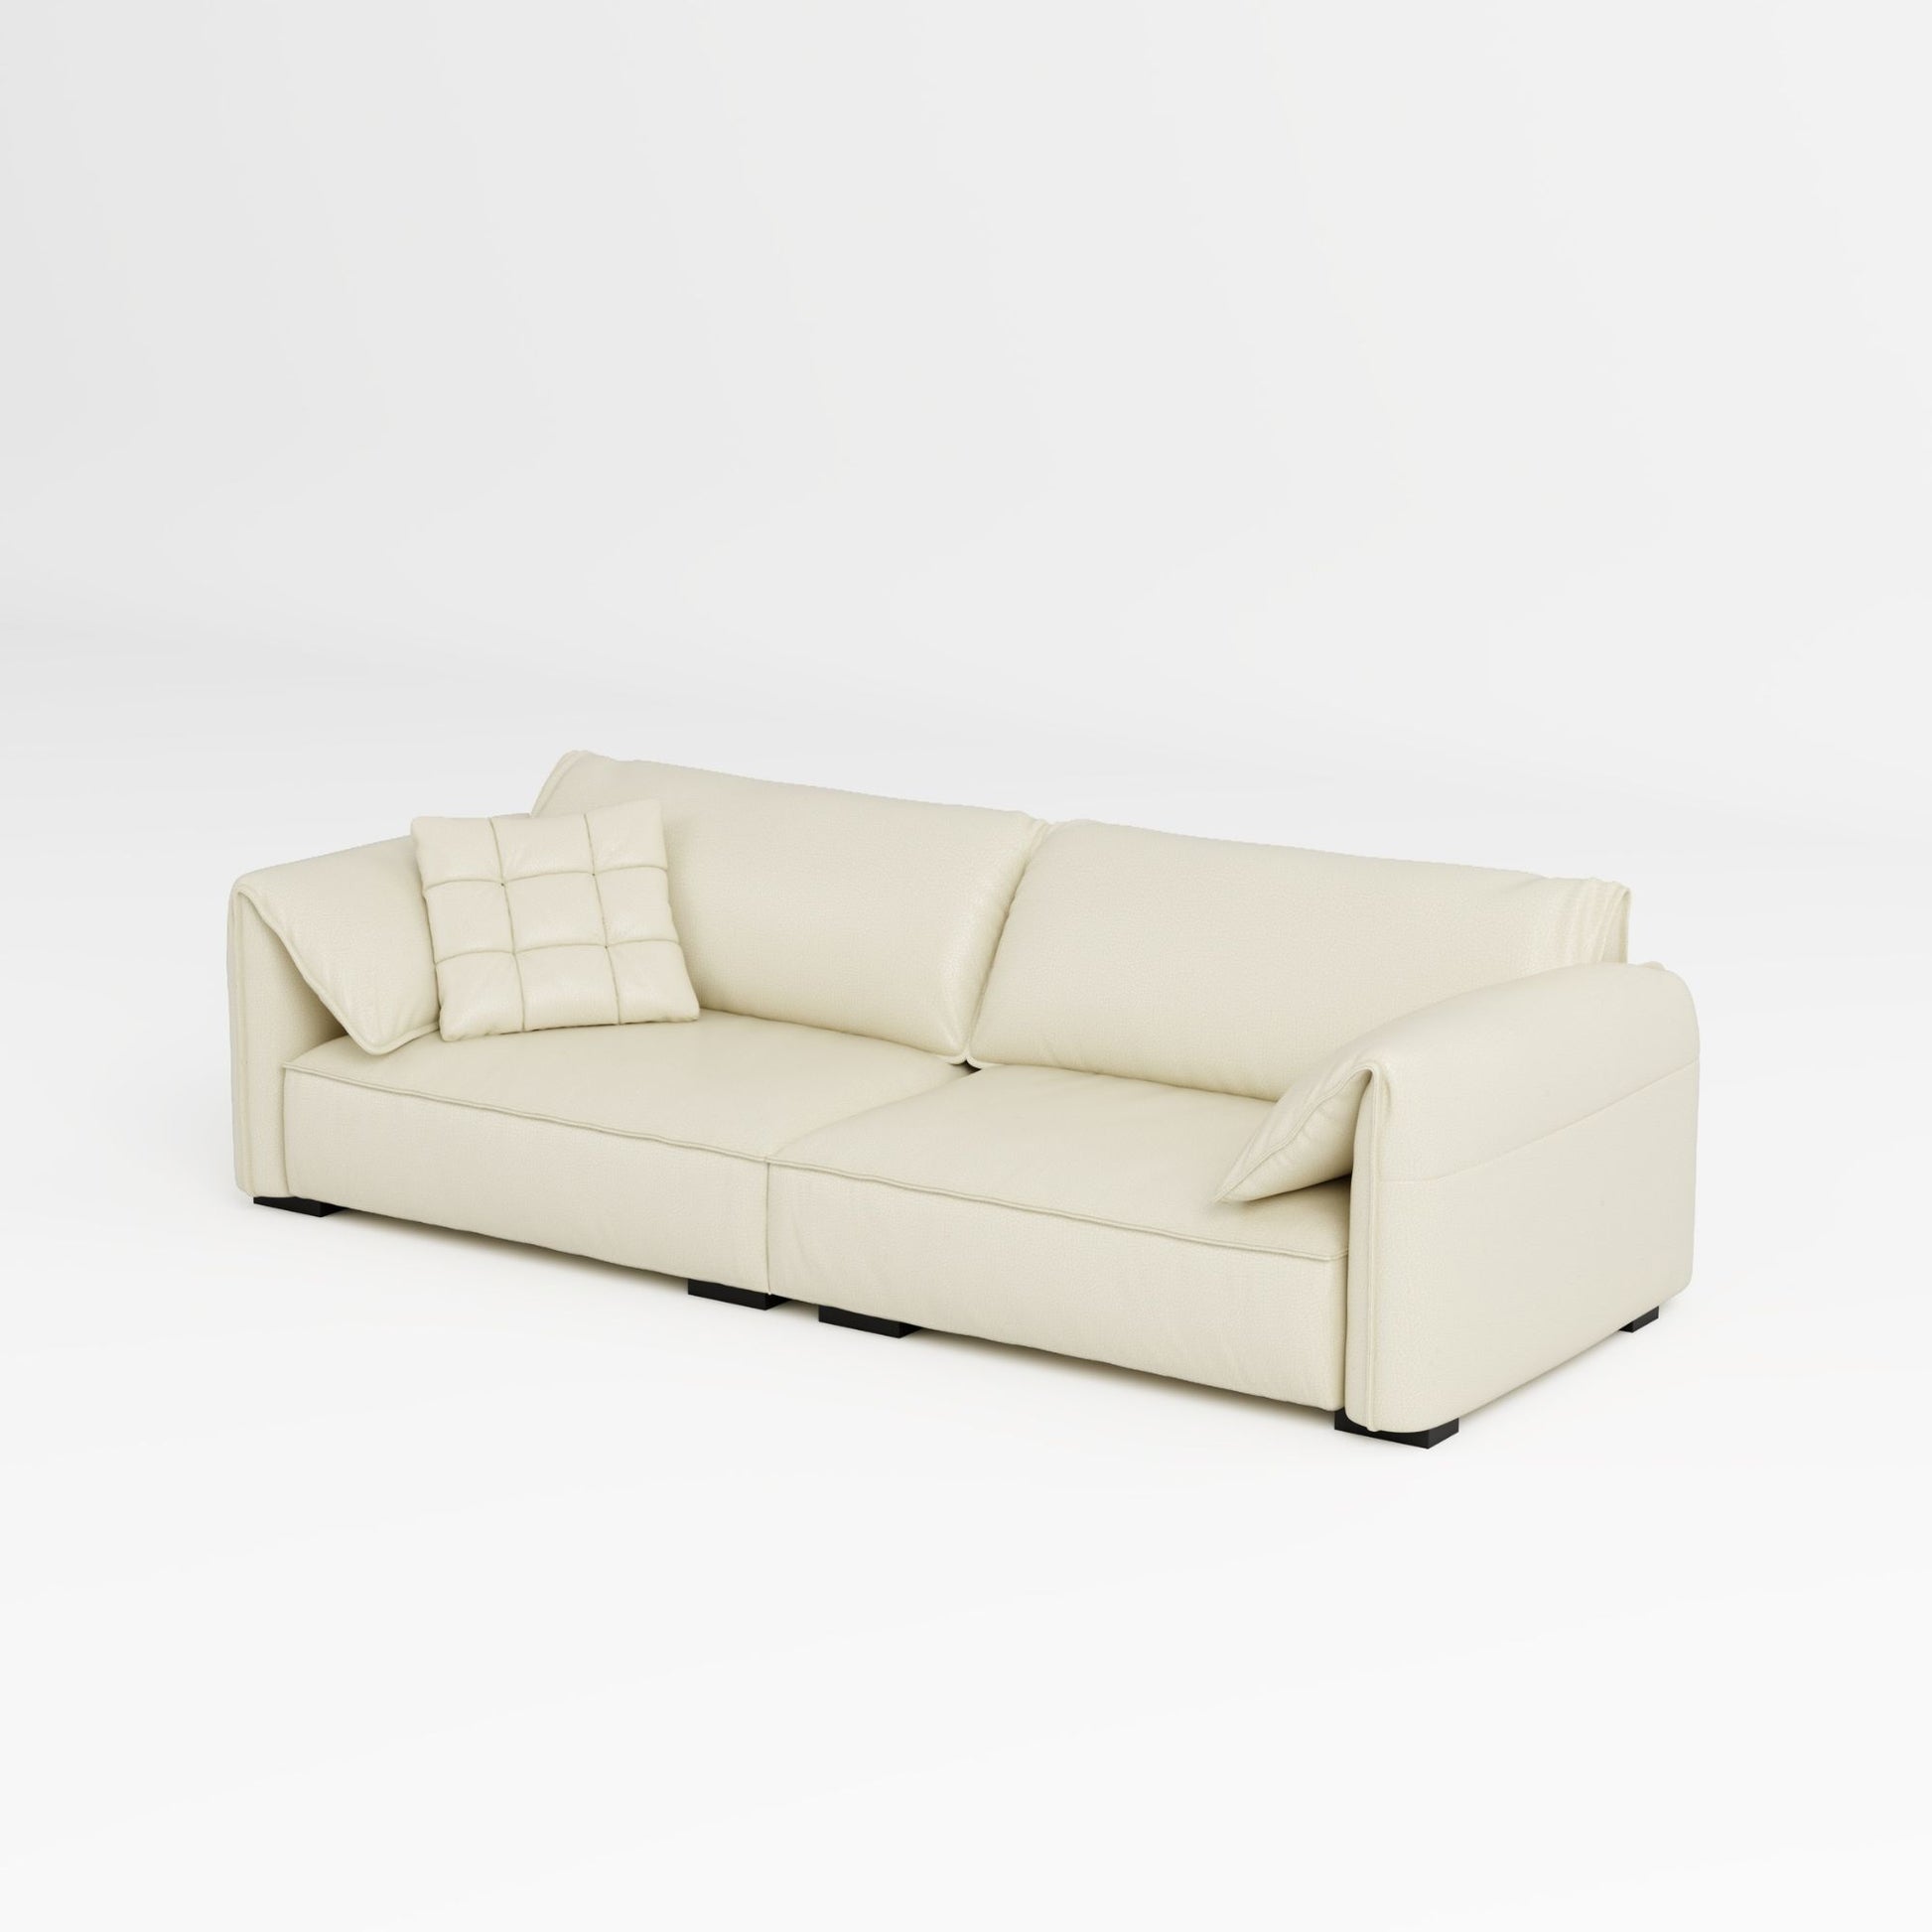 Comfy Full Leather Sofa 3 4 Seaters